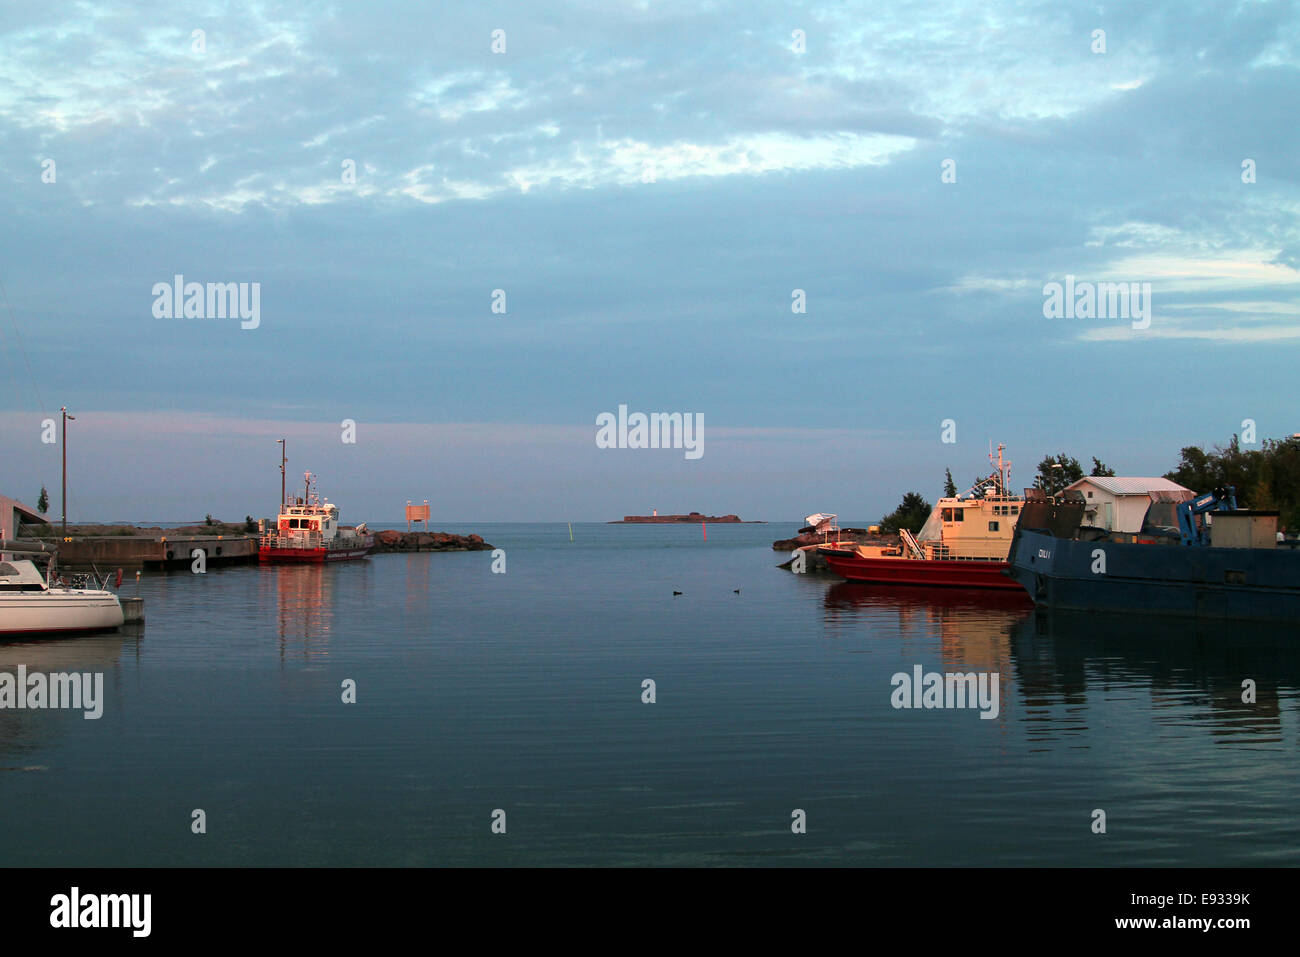 Hanko, Finland: Small boats in bay at sunset Stock Photo